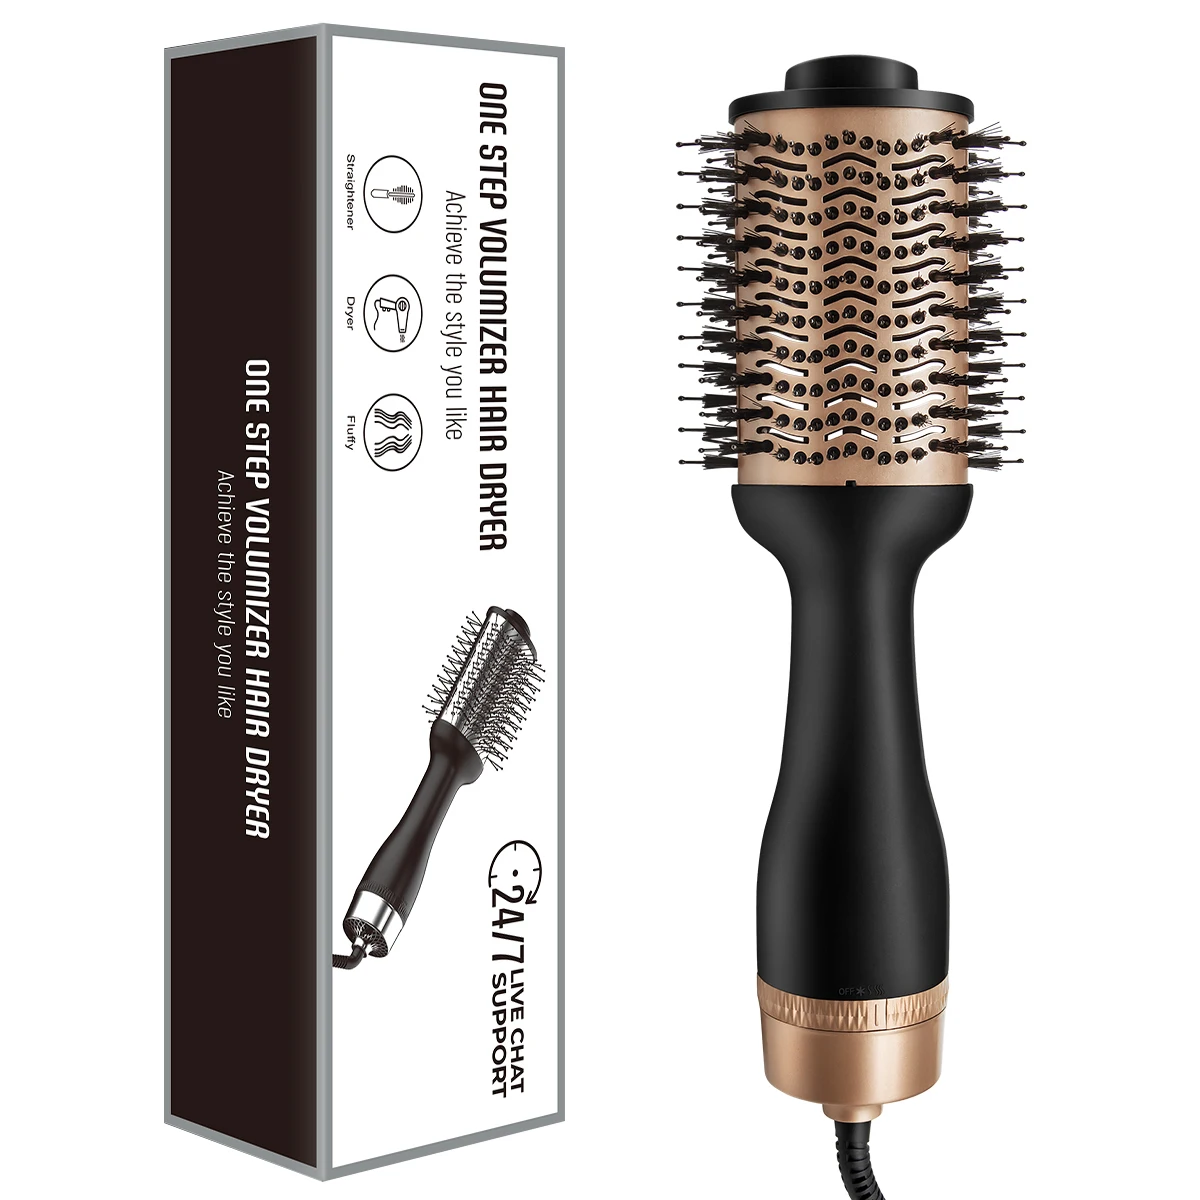 1200w Hot Air Blow Dryer Brush Professional 2 In 1 Straightener Comb  Electric Blow Dryer Rotating Hair Brush Roller Styler - Buy Hair Dryer  Styler,One Step Hair Dryer Styler,Professional Ionic Hair Dryer